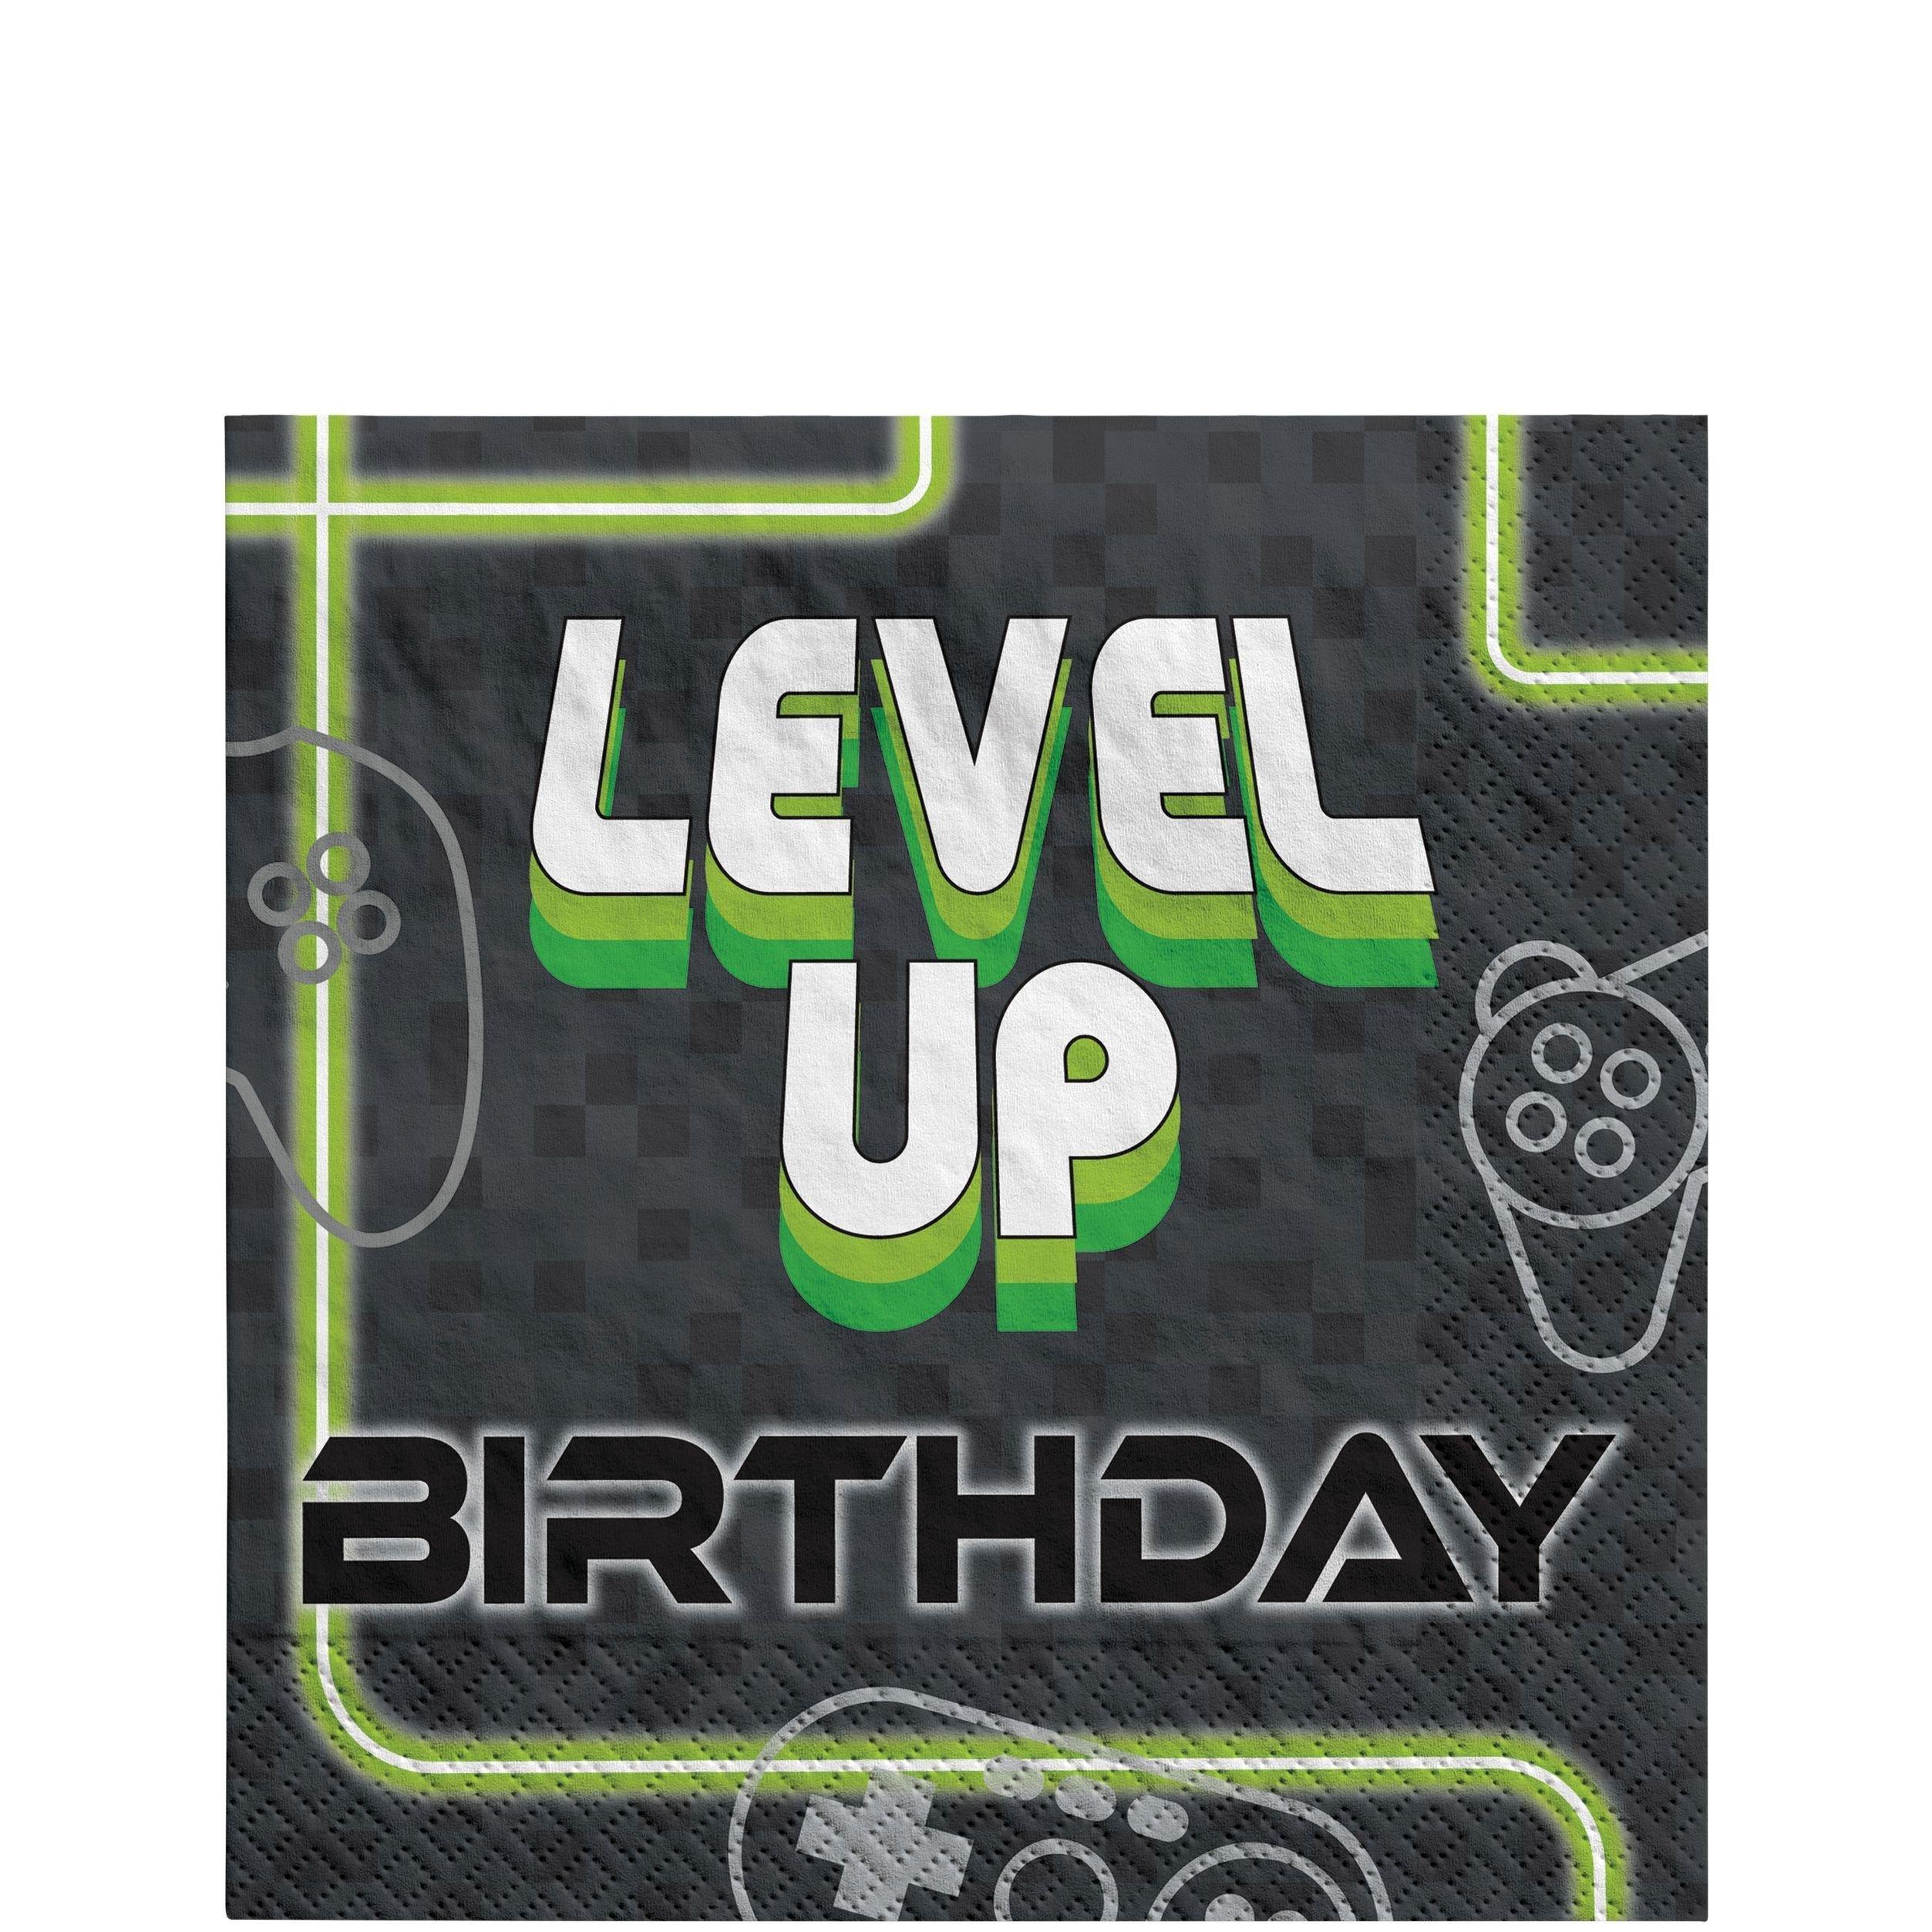 Level Up Party Supplies Pack for 8 Guests - Kit Includes Plates, Napkins & Table Cover